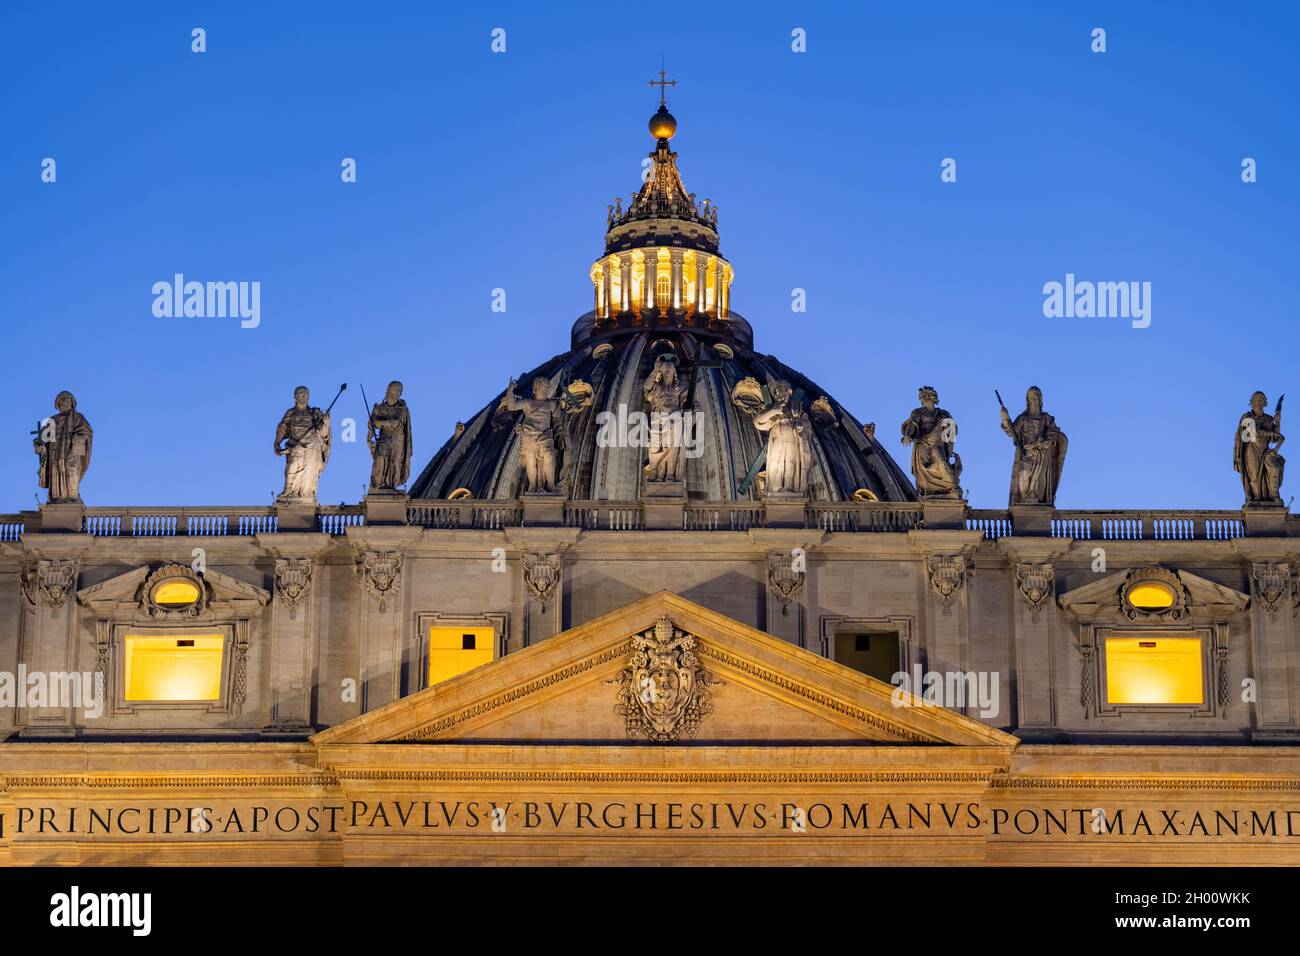 Dome, statues of Jesus and apostles and coat of arms in pediment of Saint Peter Basilica in Vatican city at dusk. Stock Photo